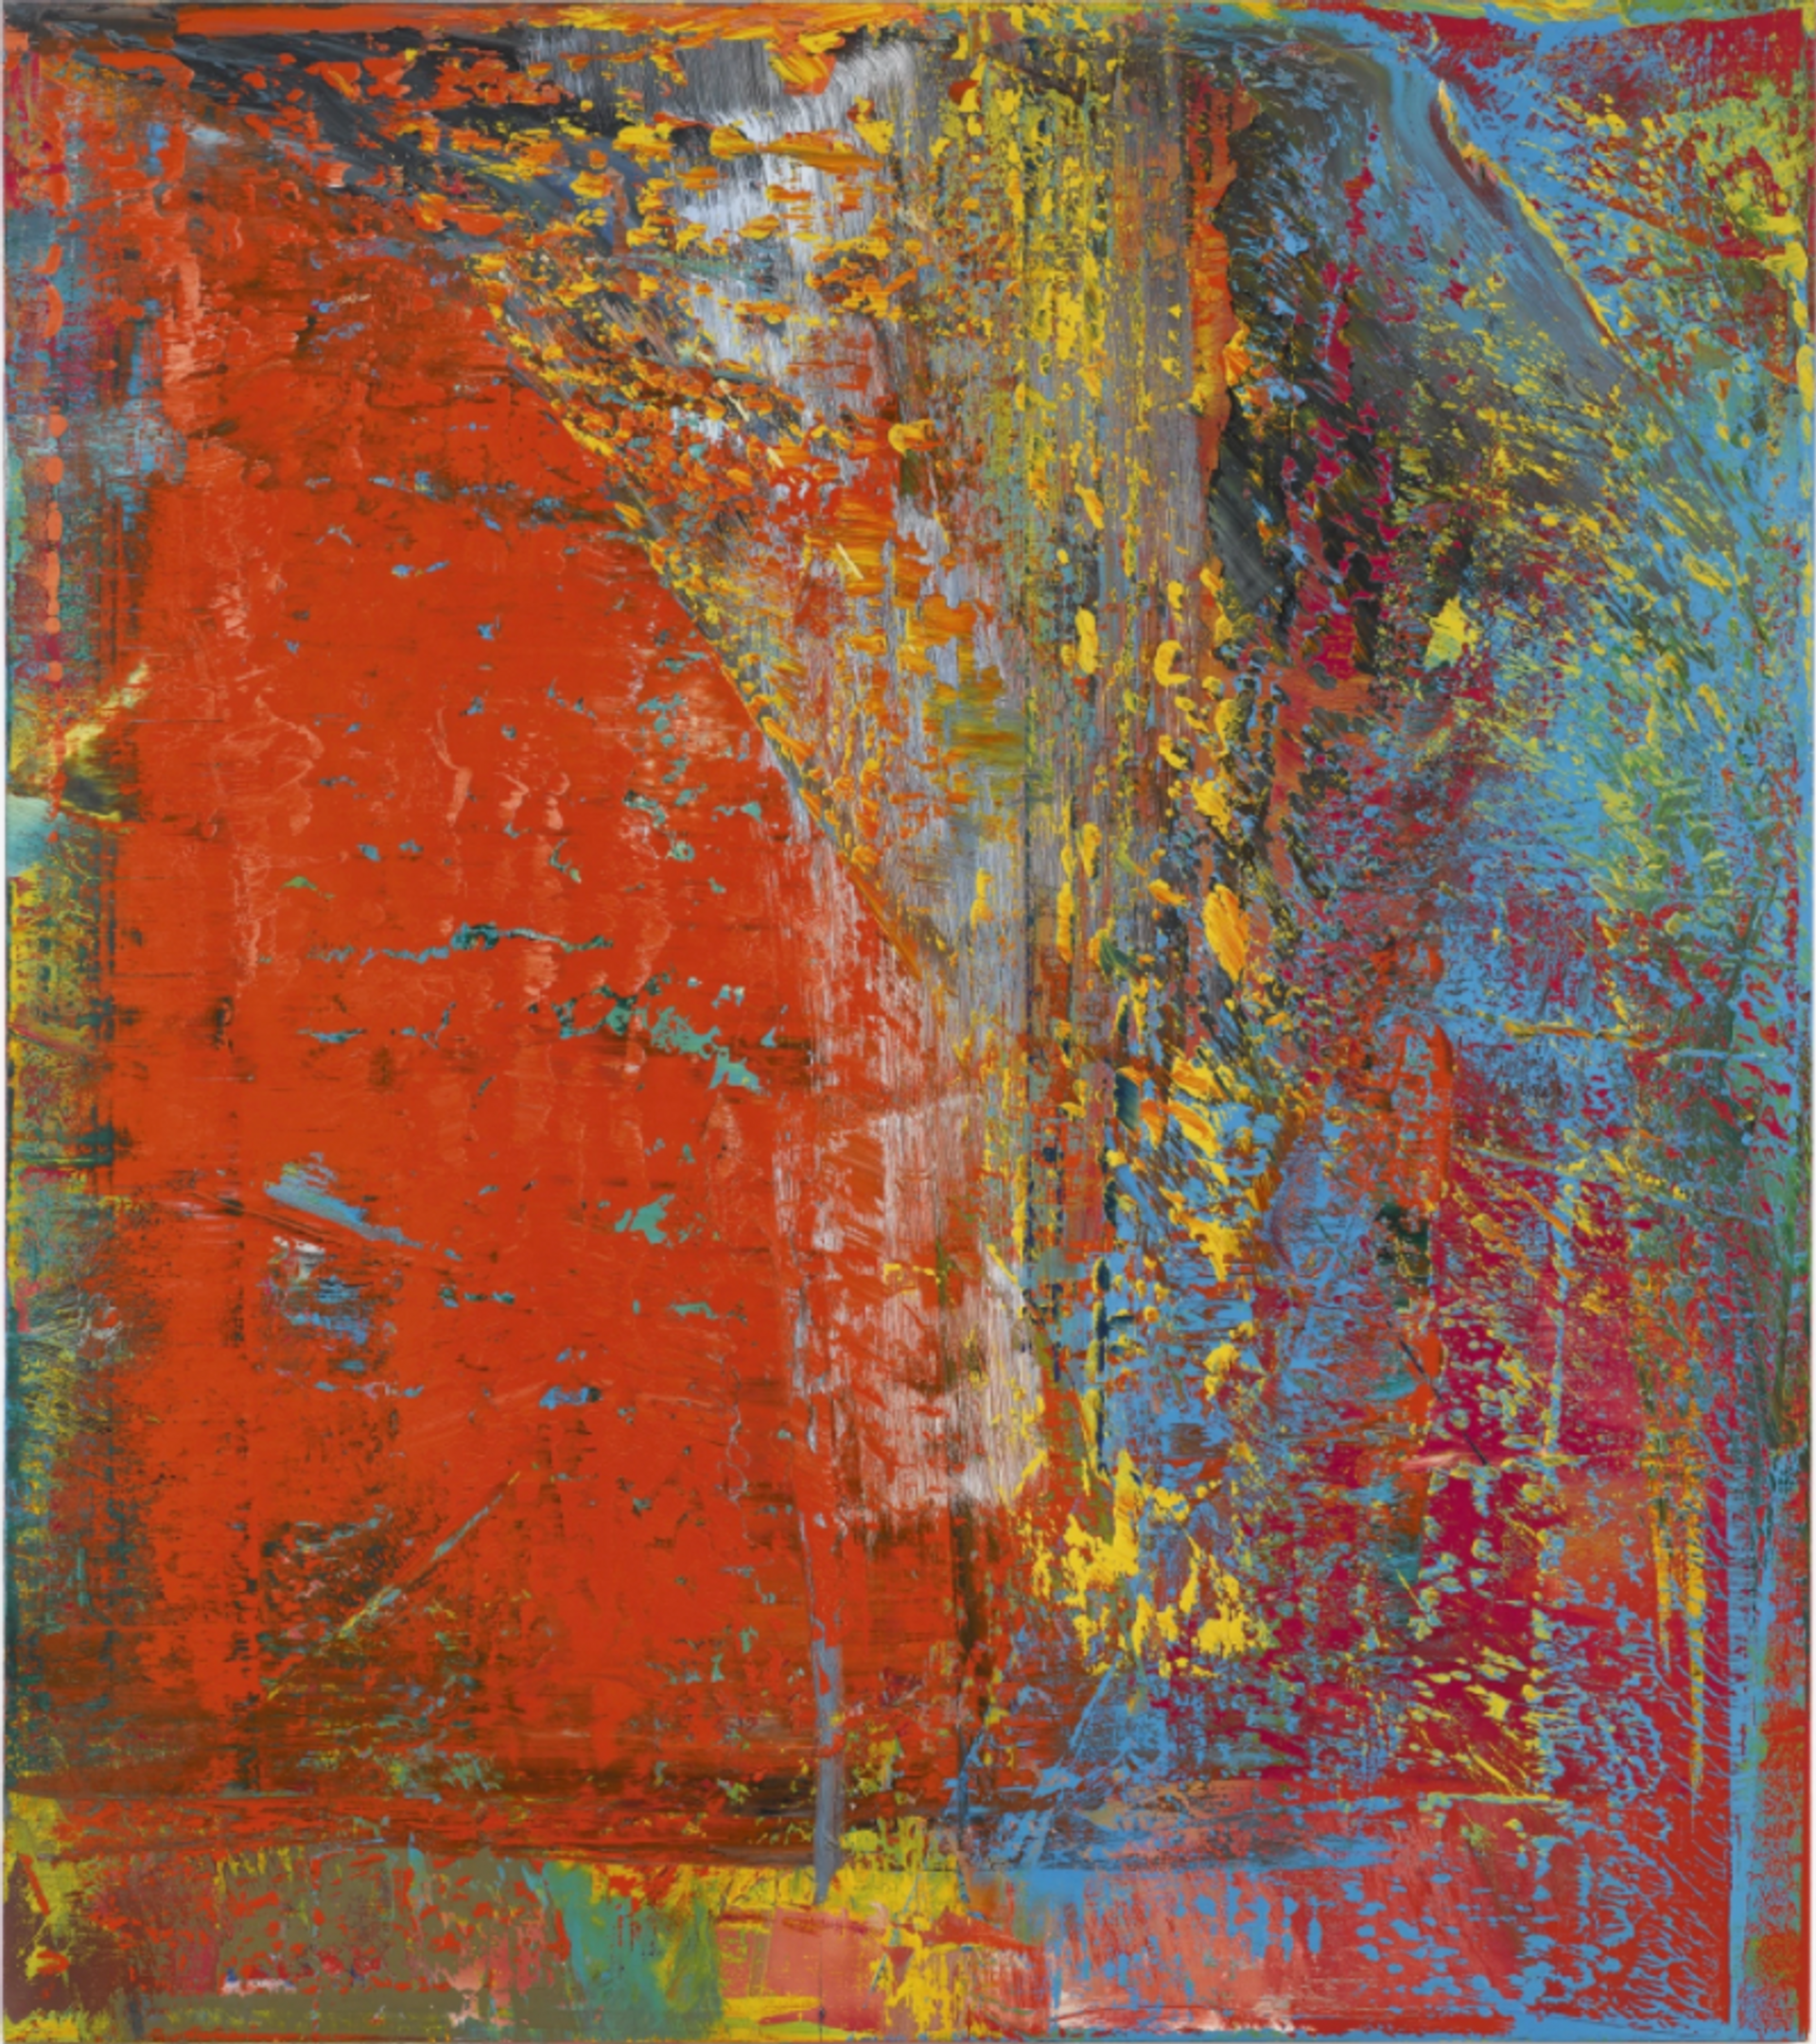 Abstract painting by Gerhard Richter, depicting abstract forms in red, blue, crimson, yellow, green and grey. These shapes trace the artist's movement during the production of the artwork.